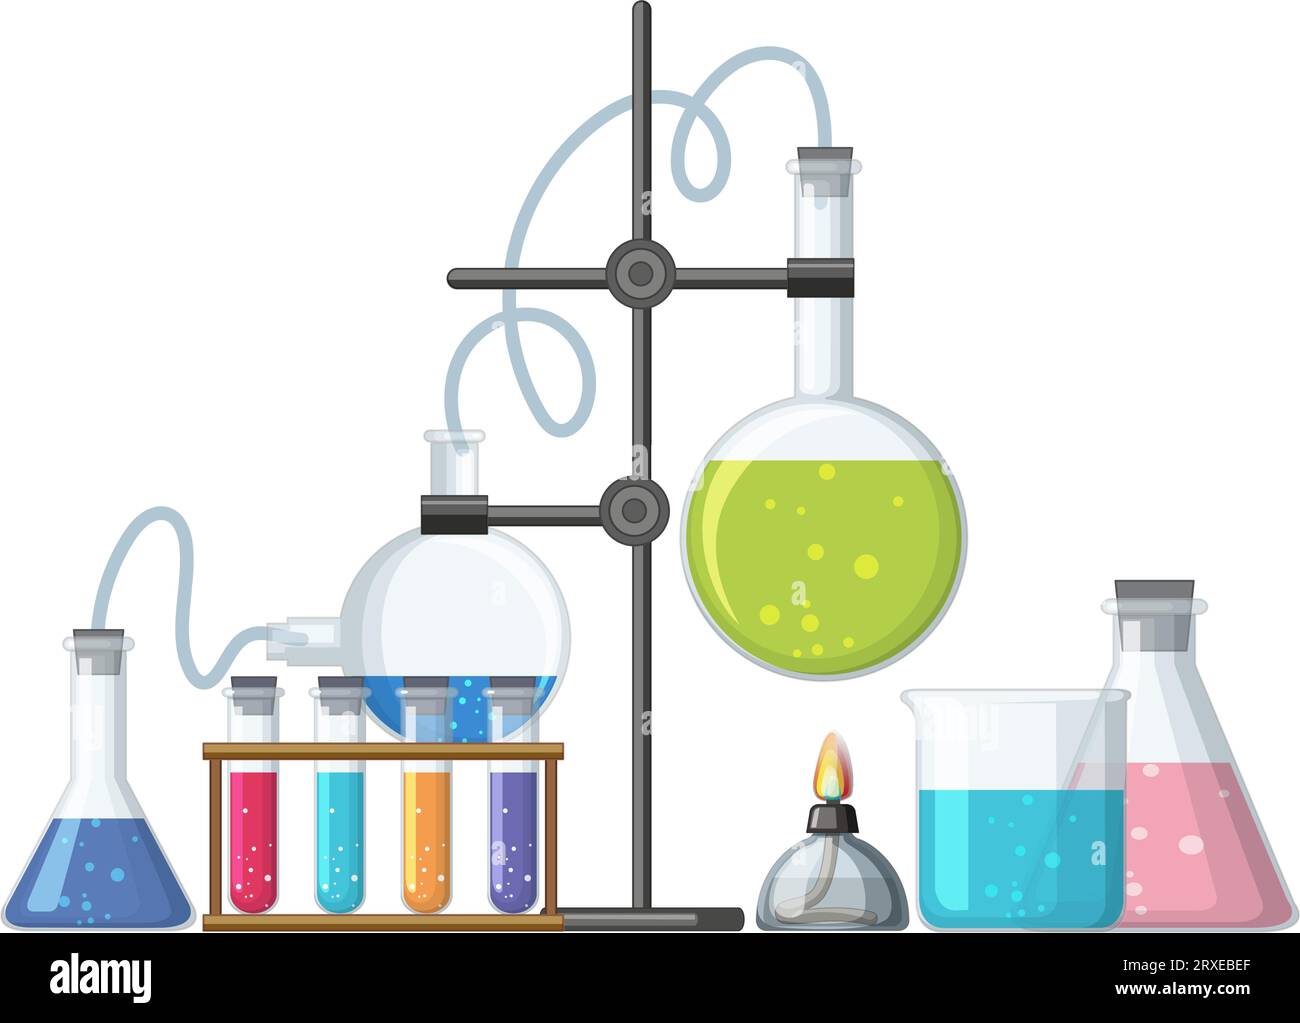 A vector cartoon illustration of science lab tools and equipments Stock ...